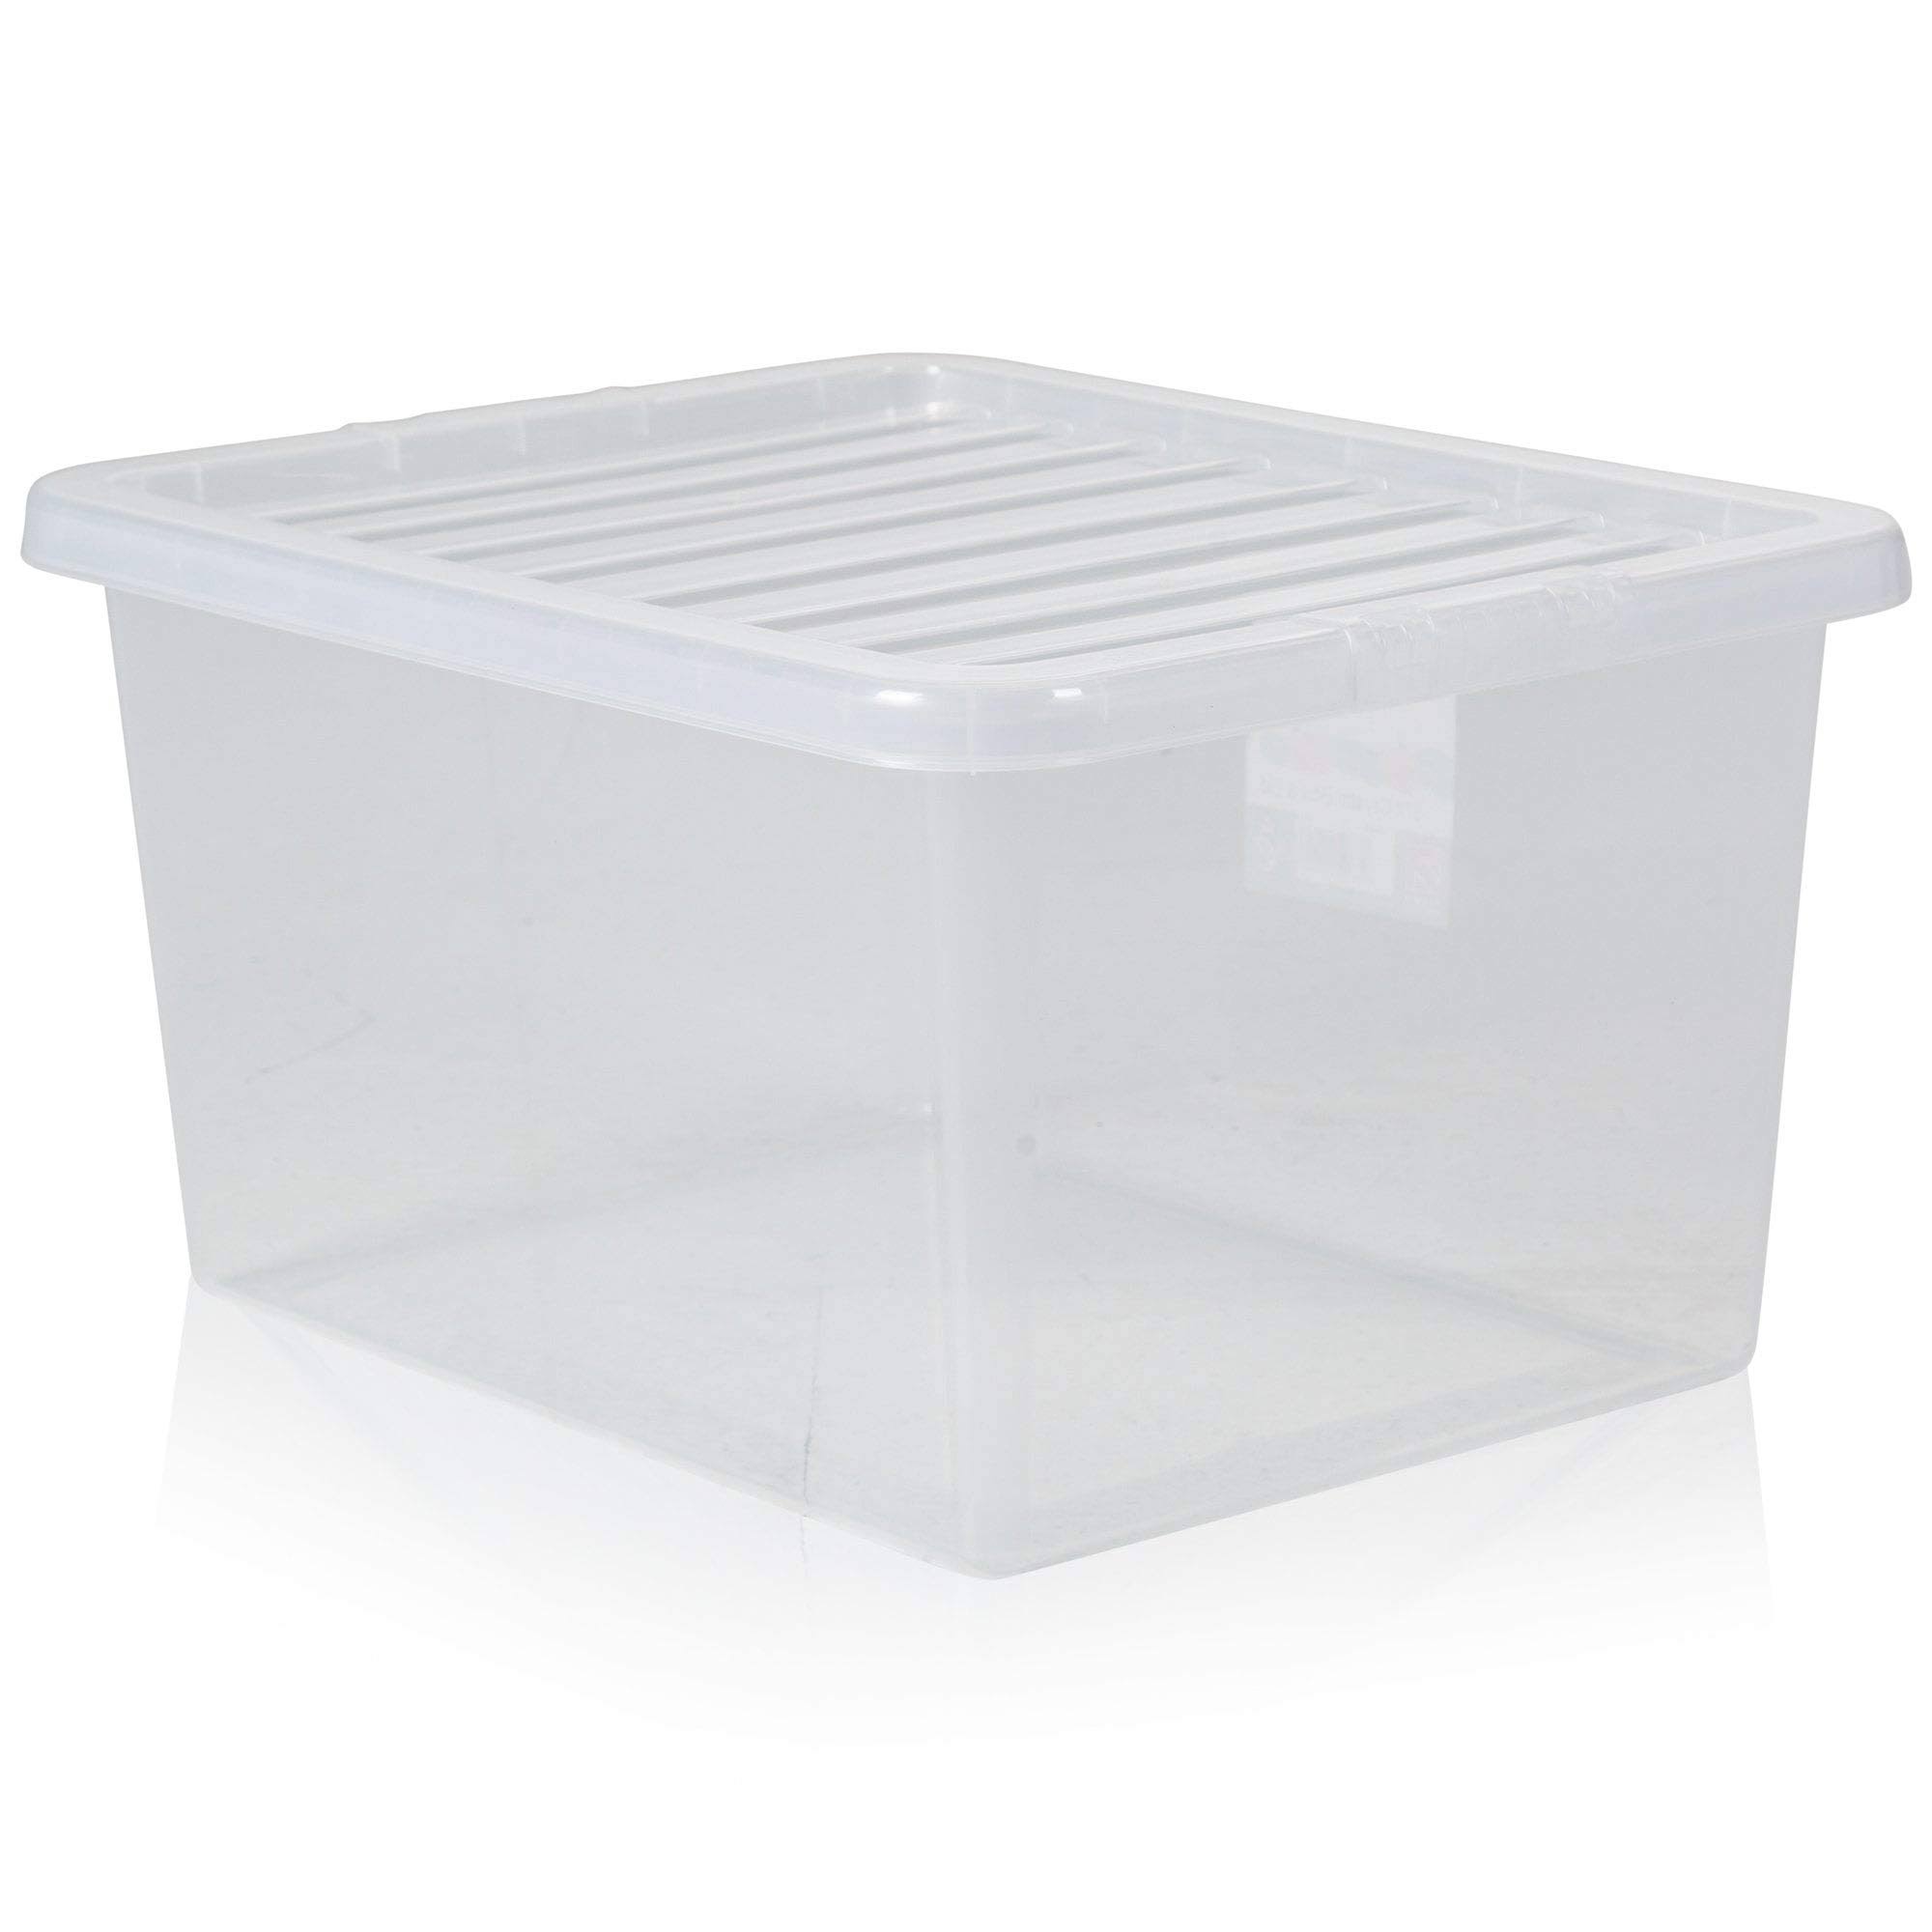 Wham Crystal 37 Litre Plastic Storage Box with Lid, Clear